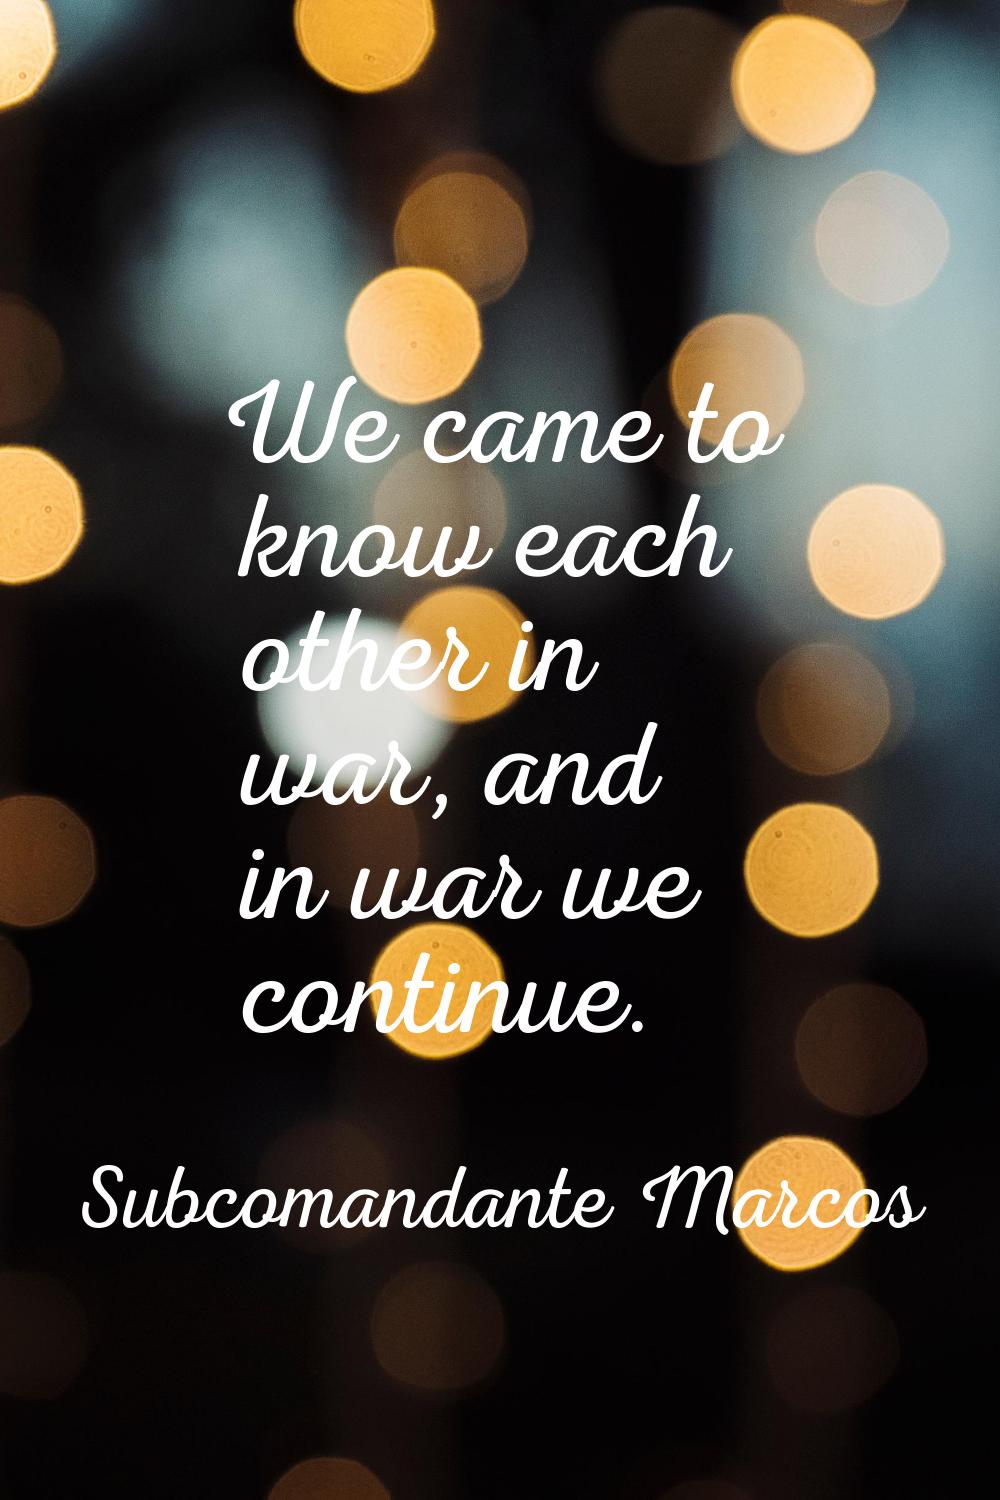 We came to know each other in war, and in war we continue.